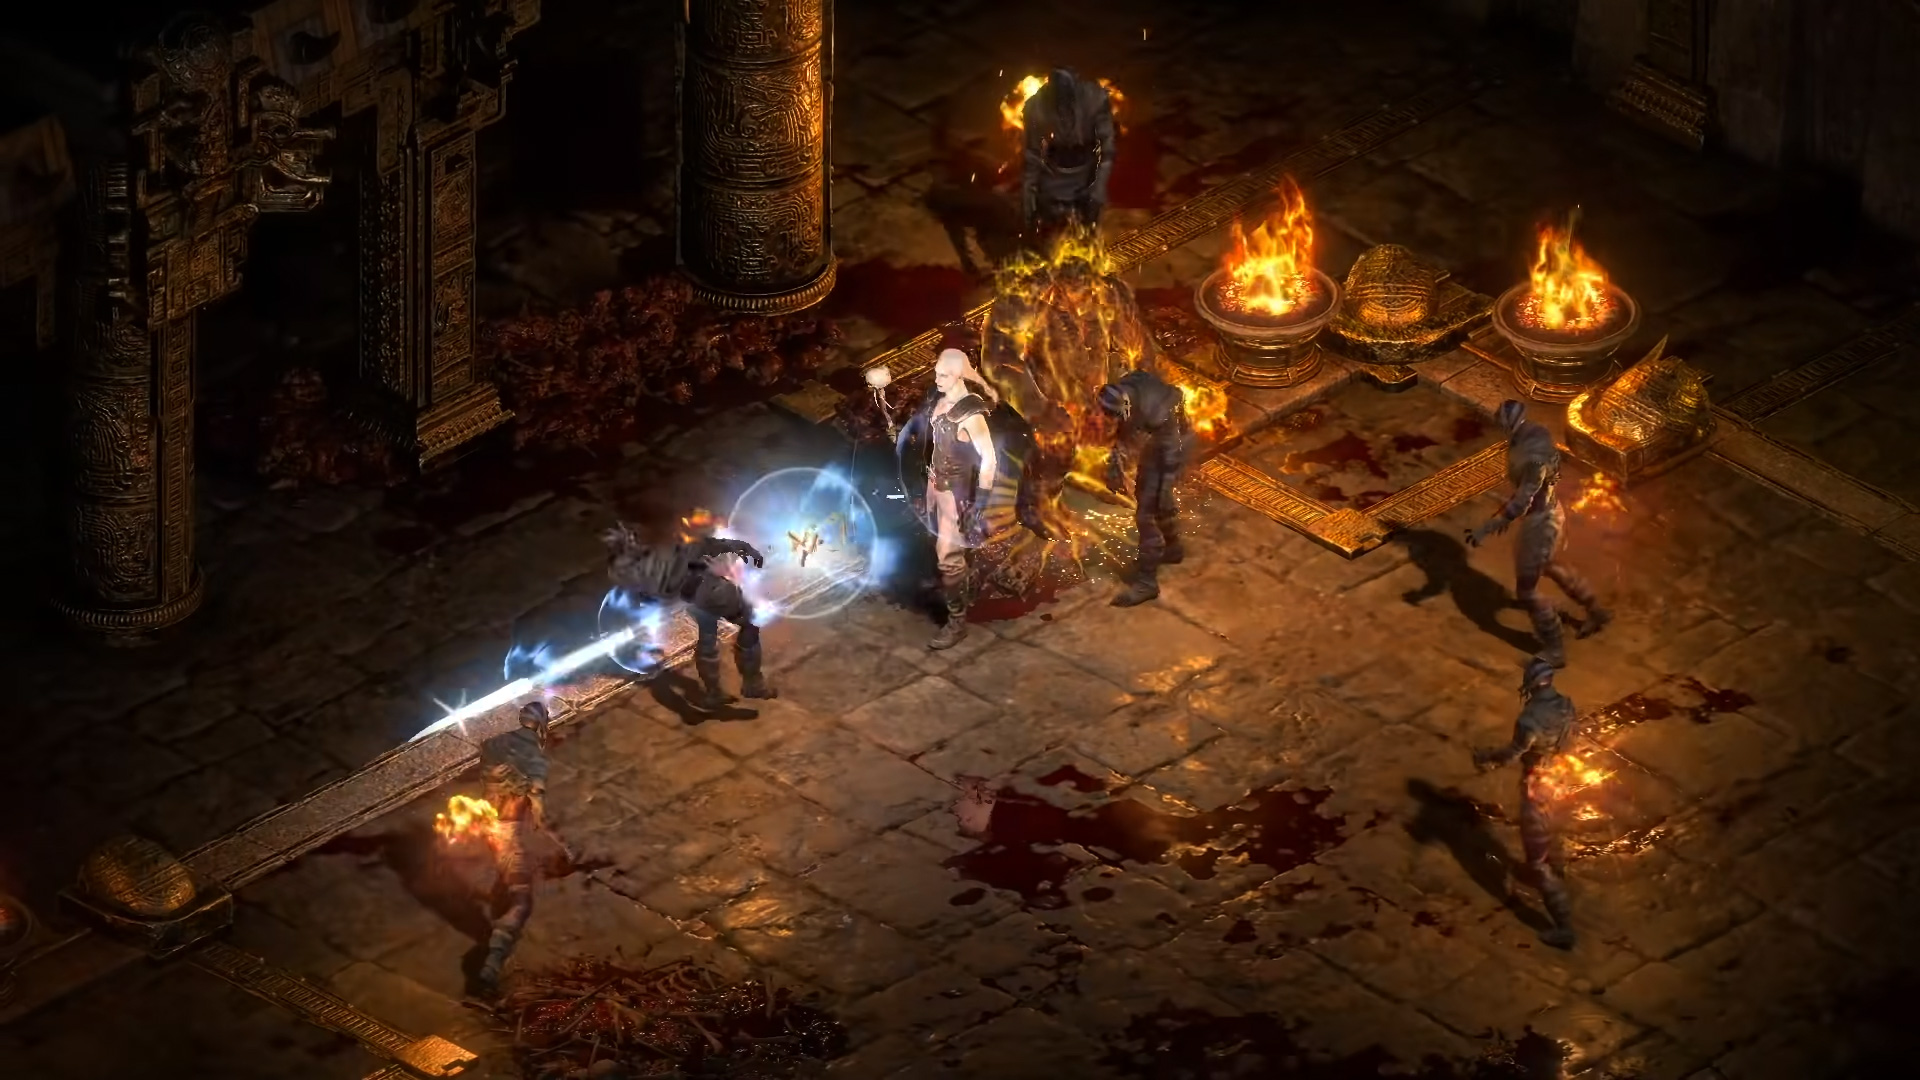 Diablo 2 Resurrected For PC Play Station Nintendo And XBOX Is Plagued by Disappearing Character Bugs!